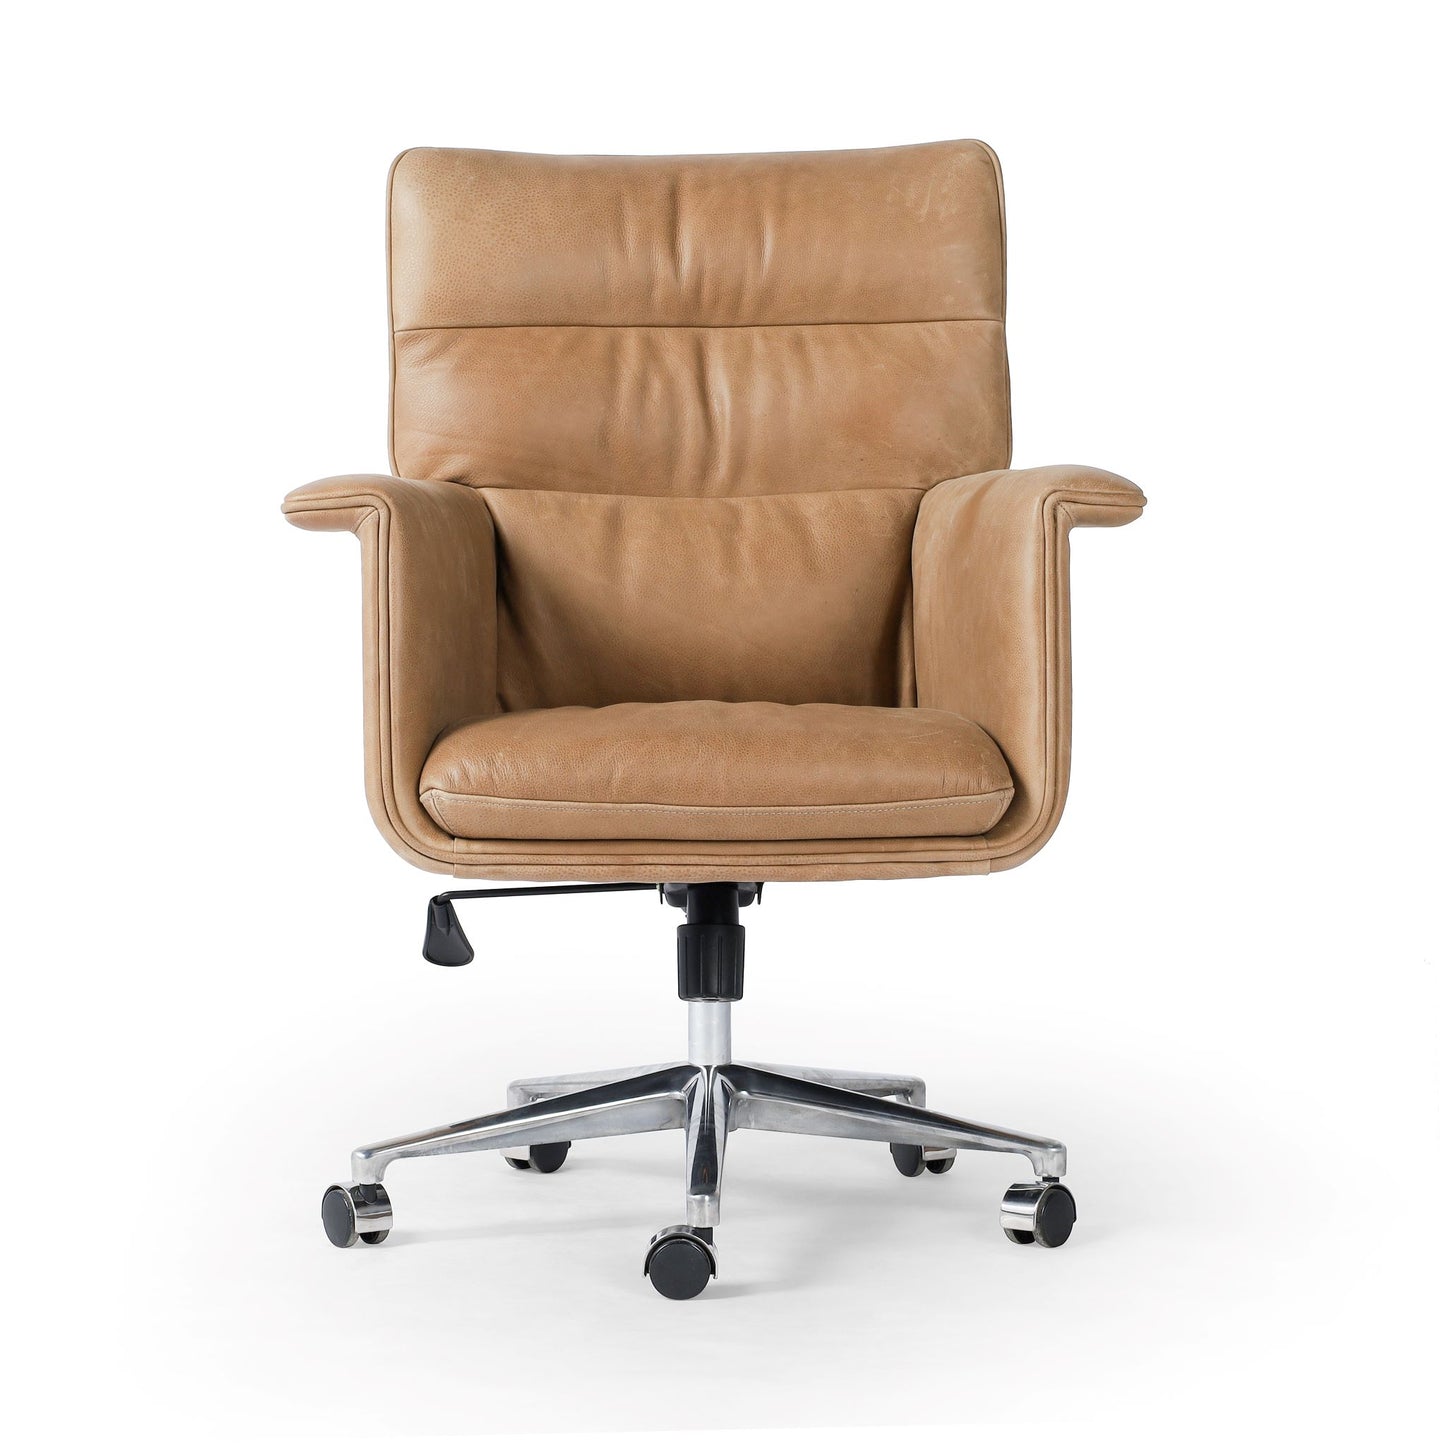 Load image into Gallery viewer, Humphrey Desk Chair Office Chair Four Hands     Four Hands, Mid Century Modern Furniture, Old Bones Furniture Company, Old Bones Co, Modern Mid Century, Designer Furniture, https://www.oldbonesco.com/
